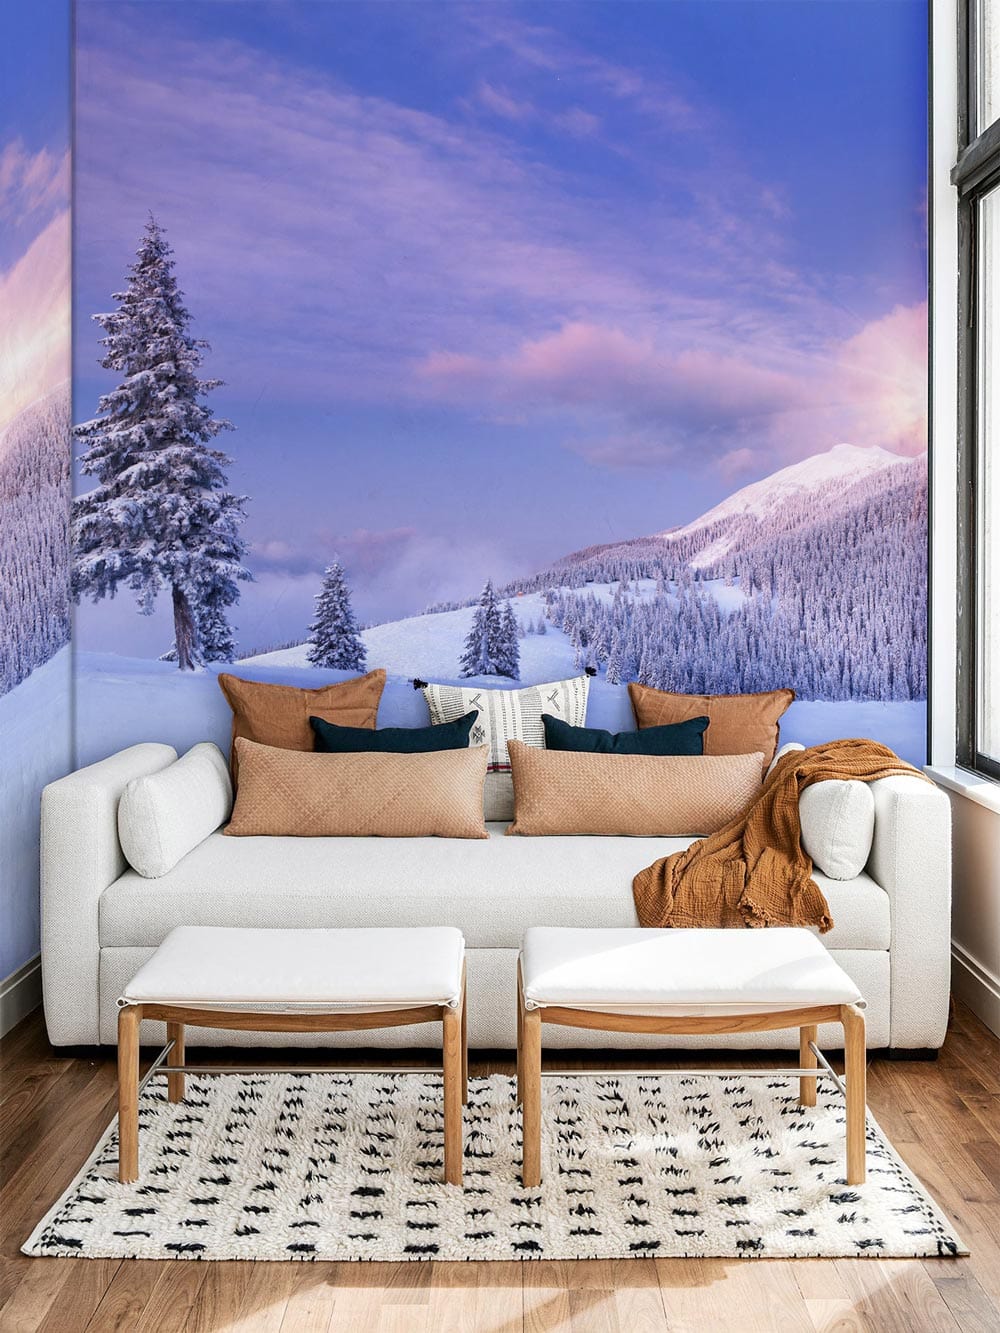 purple sky and snowy mountain wall murals aesthetic art